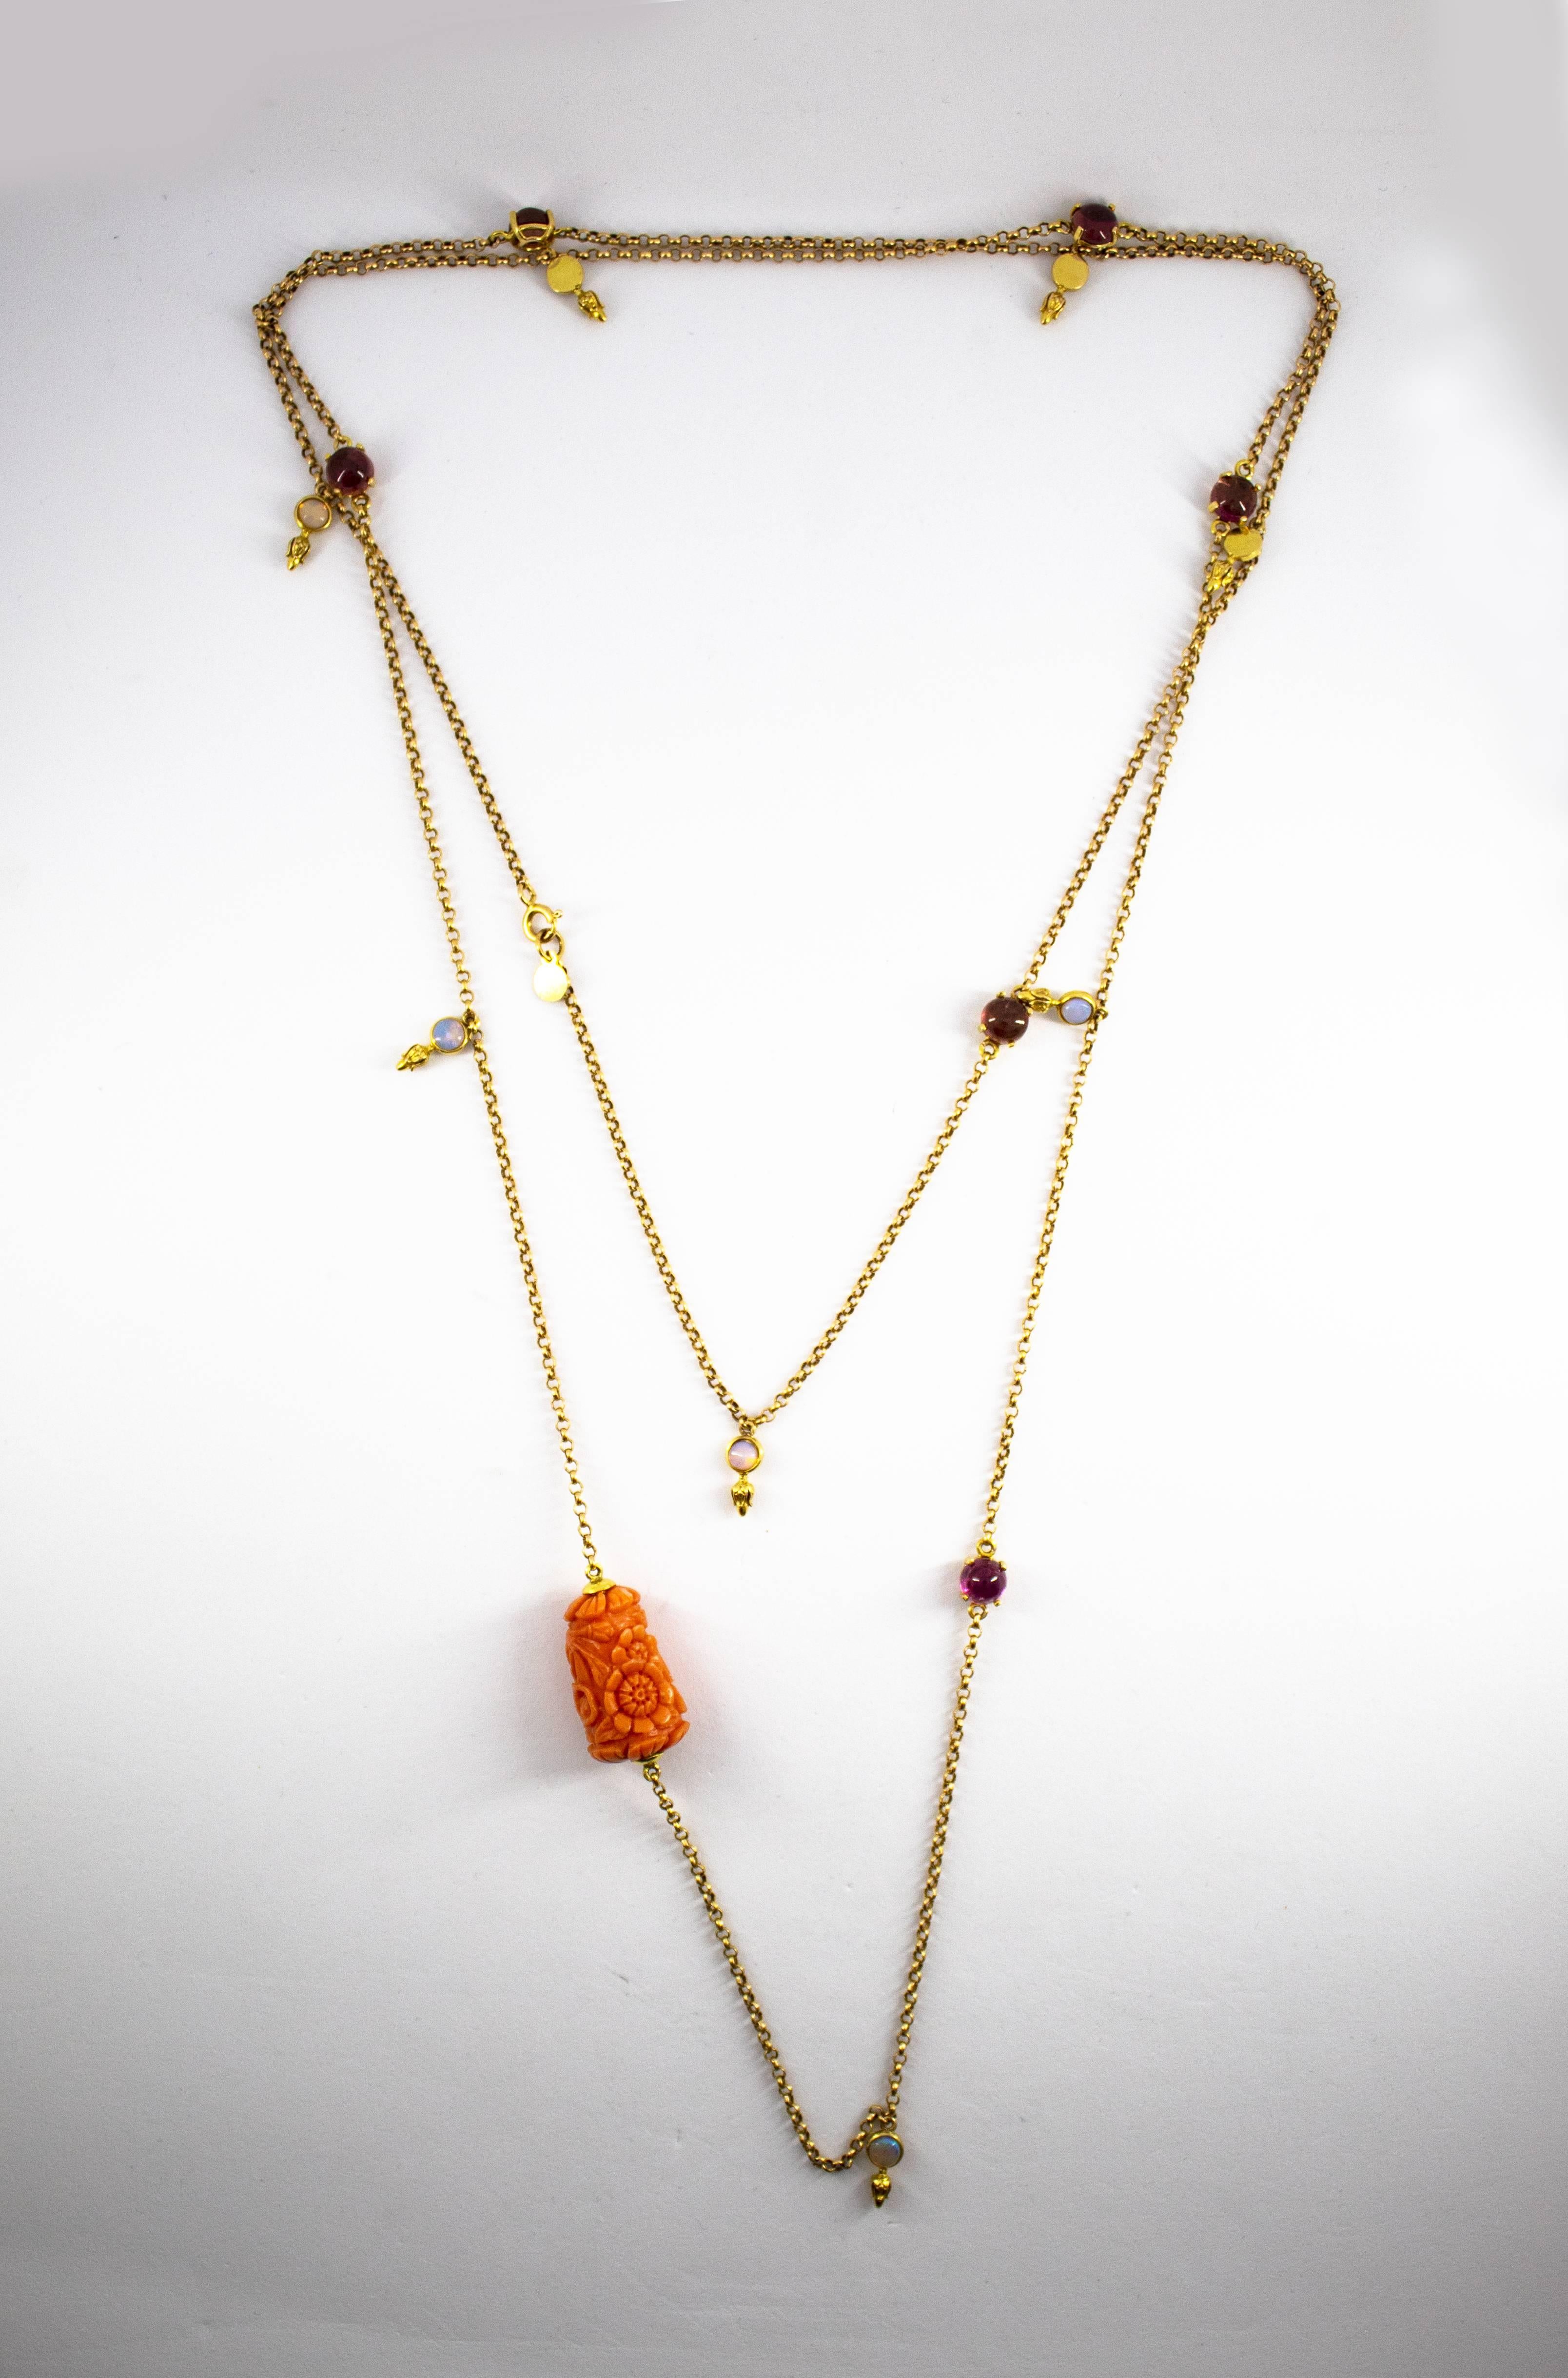 This Necklace is made of 14K Yellow Gold.
This Necklace has 0.80 Carats of Opals.
This Necklace has 4.80 Carats of Tourmaline.
This Necklace has Pink Coral.
The Necklace Length is 115cm.
We're a workshop so every piece is handmade, customizable and